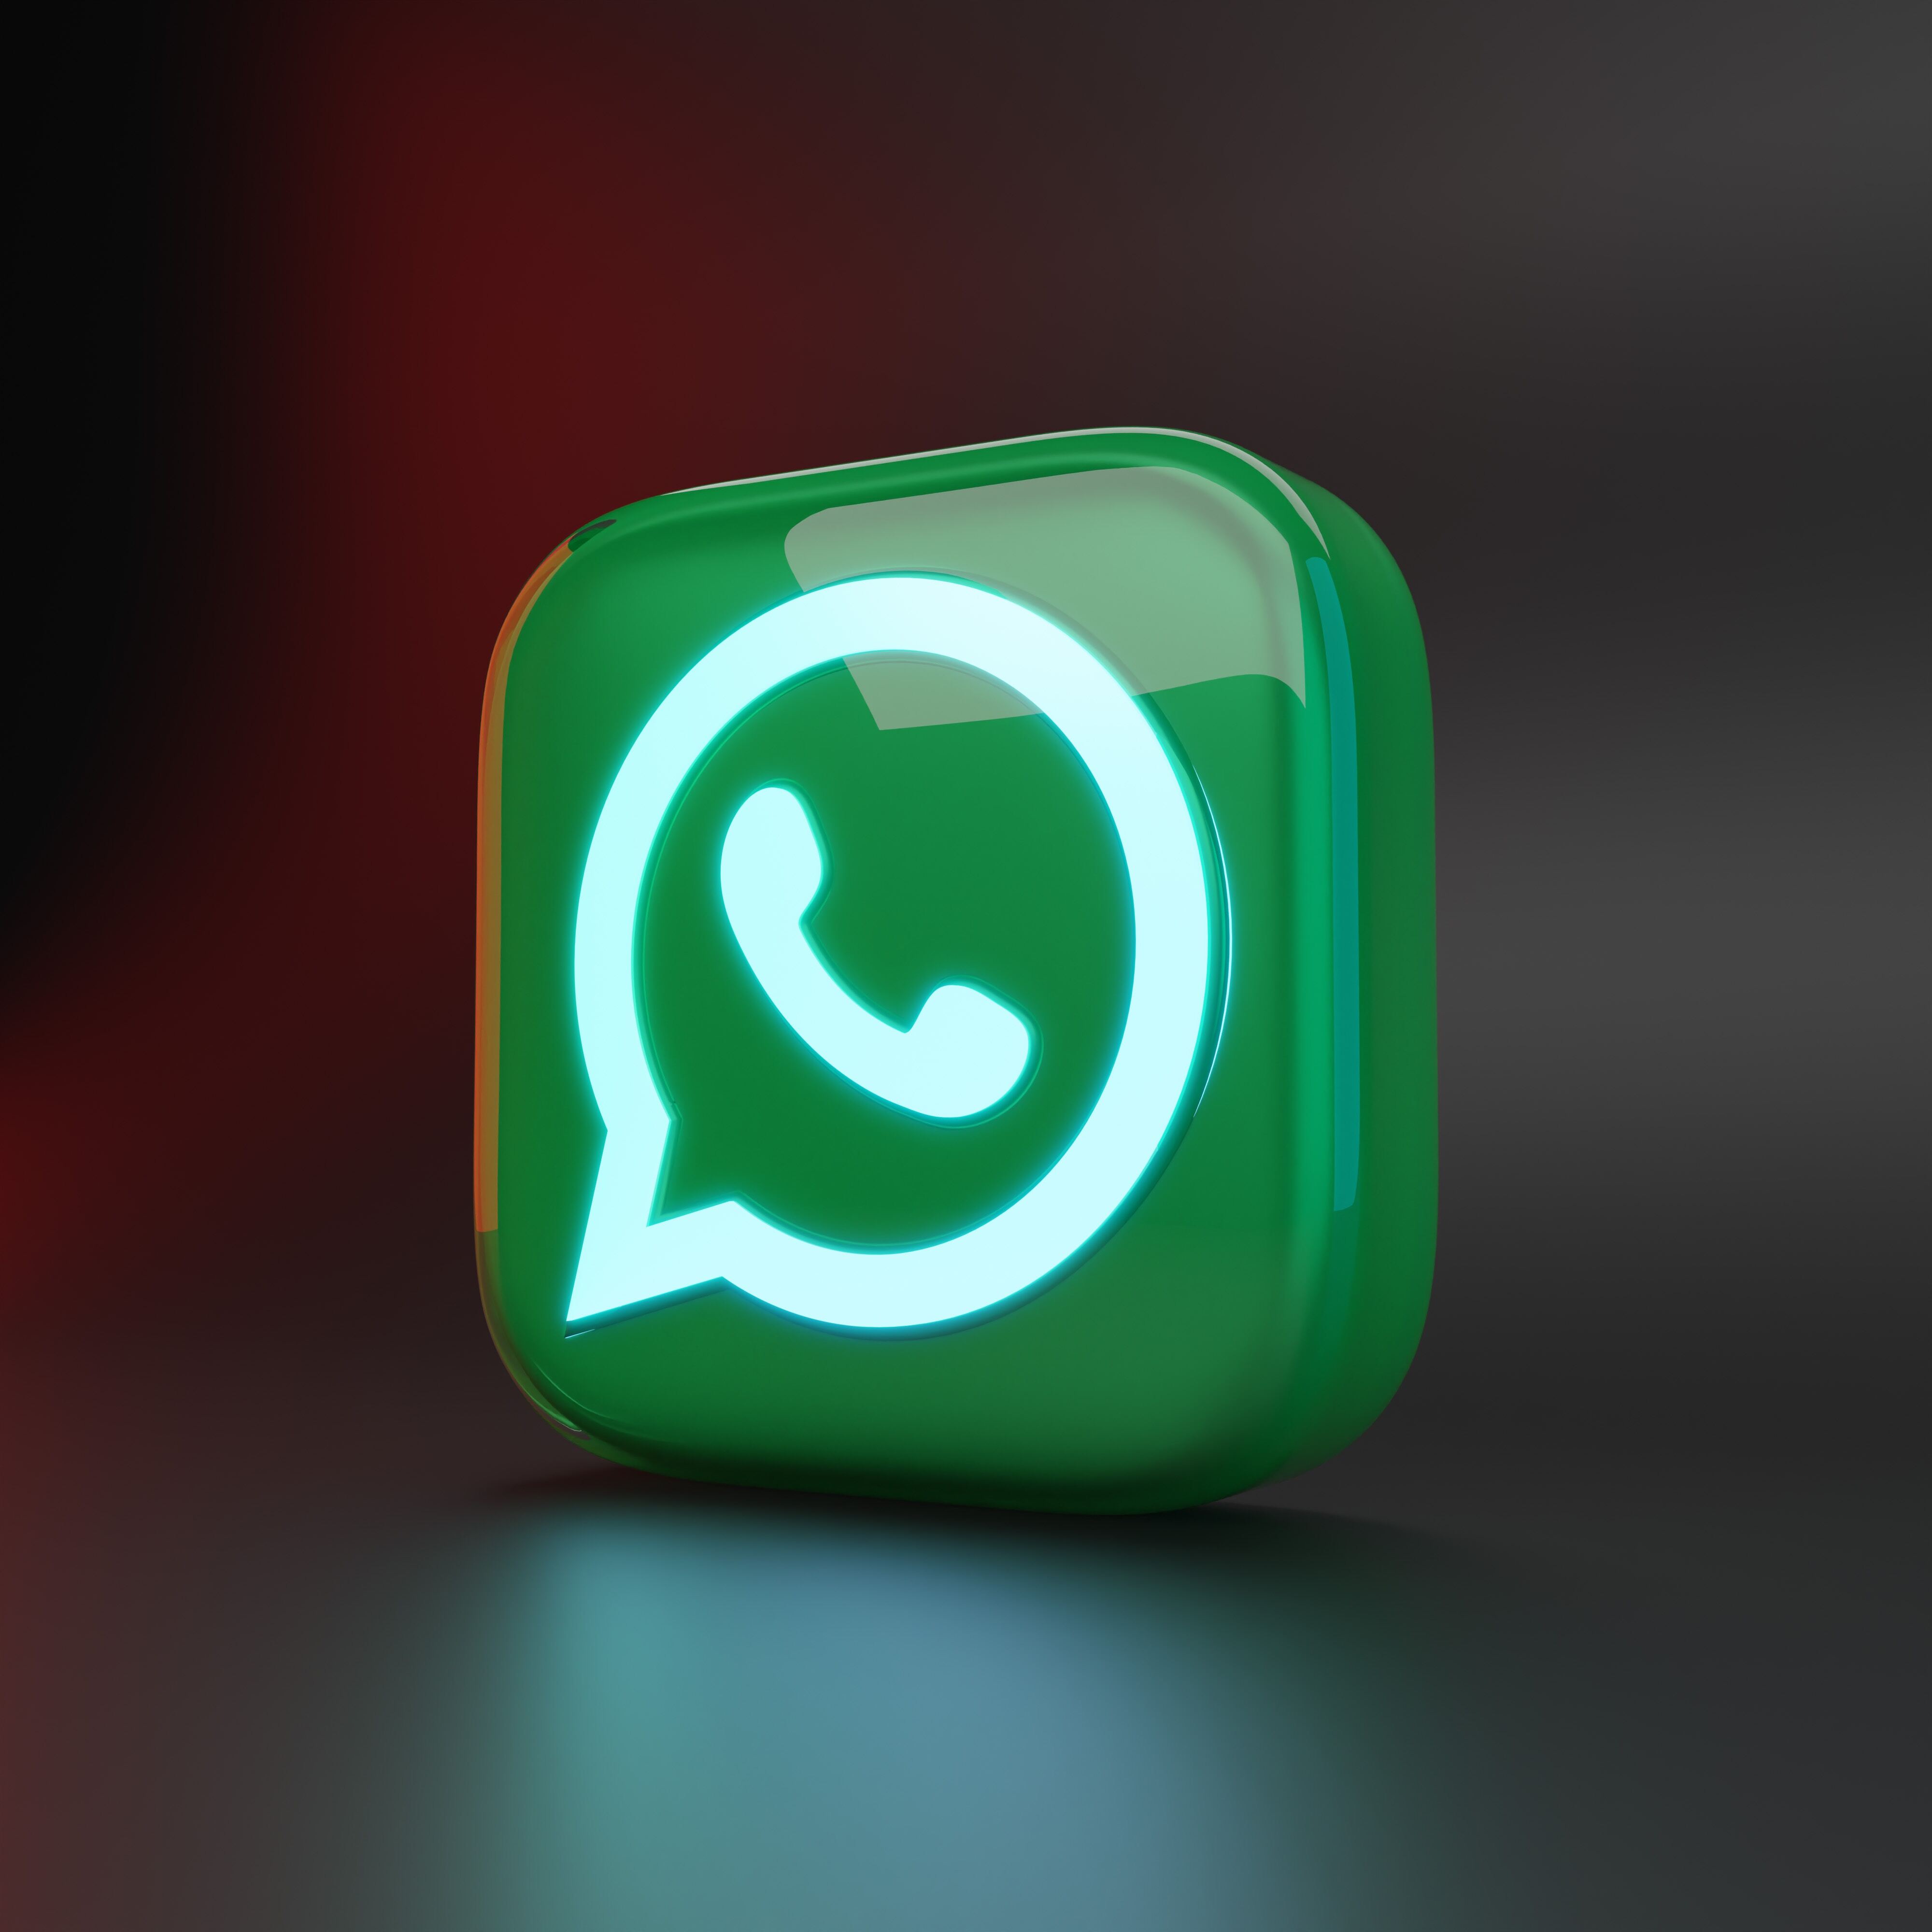 Boosting Sales to New Heights with WhatsApp-Enabled Conversational Commerce